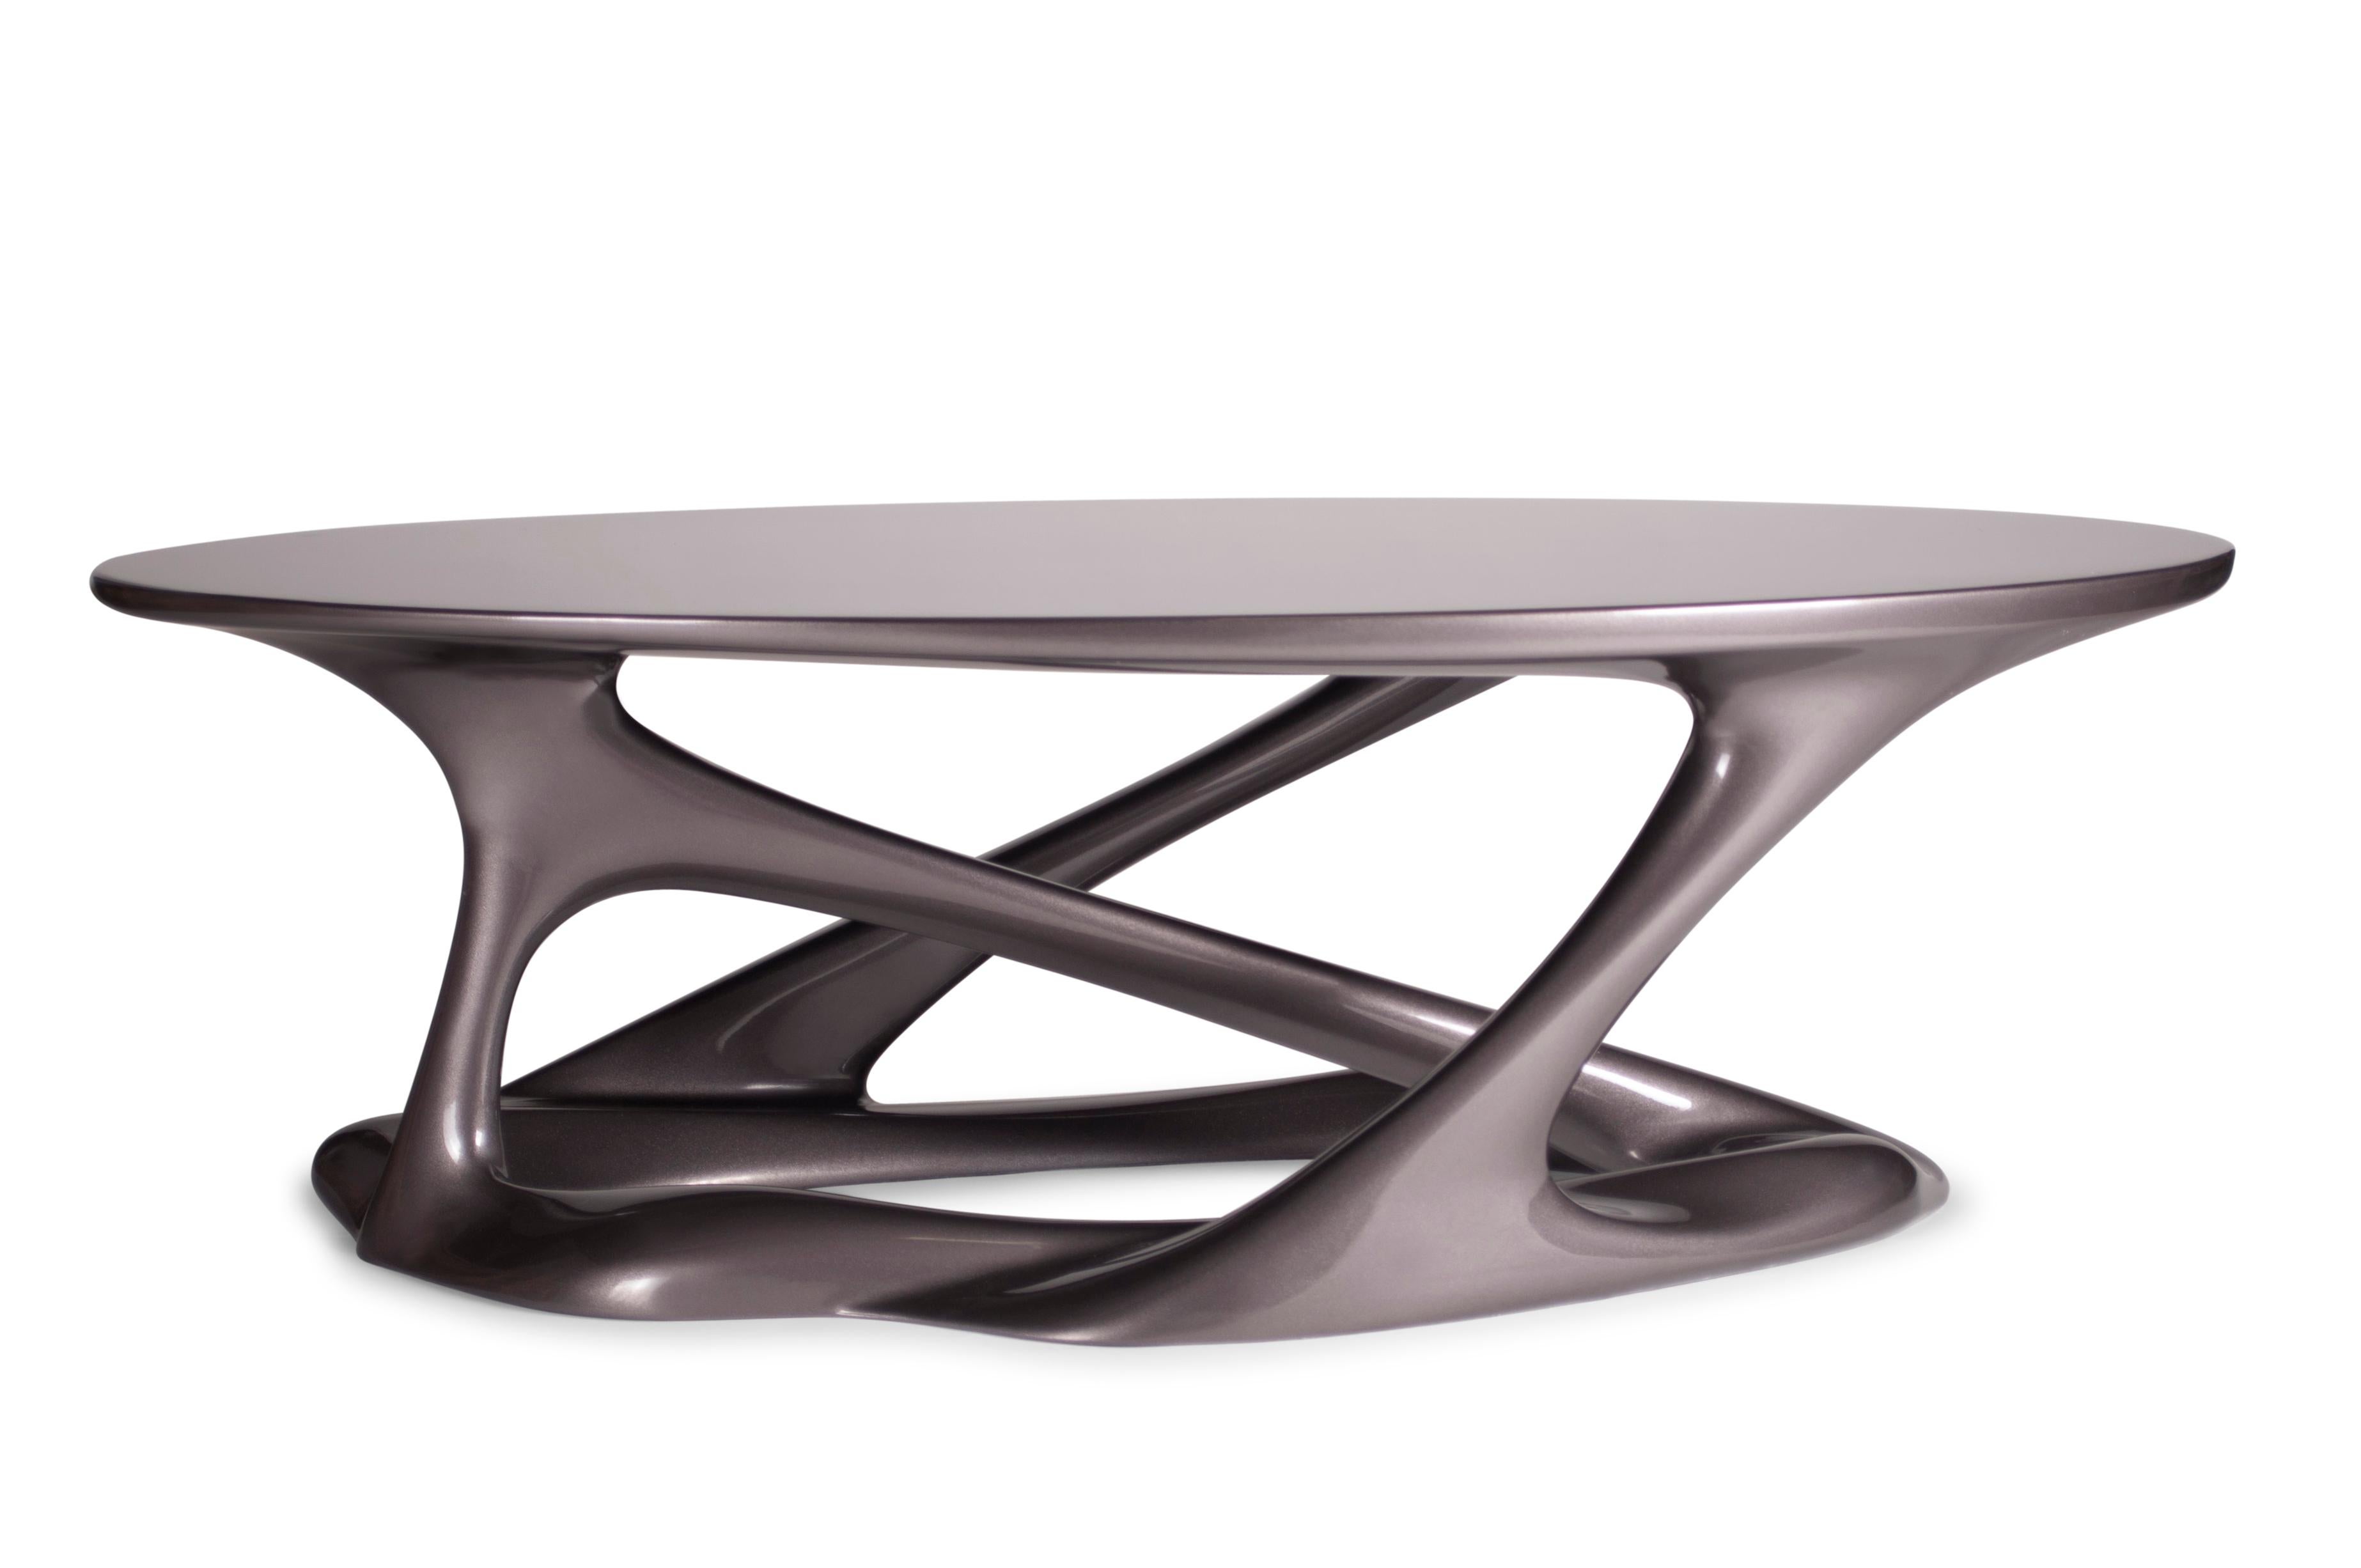 Oval shape table with dimension of 60